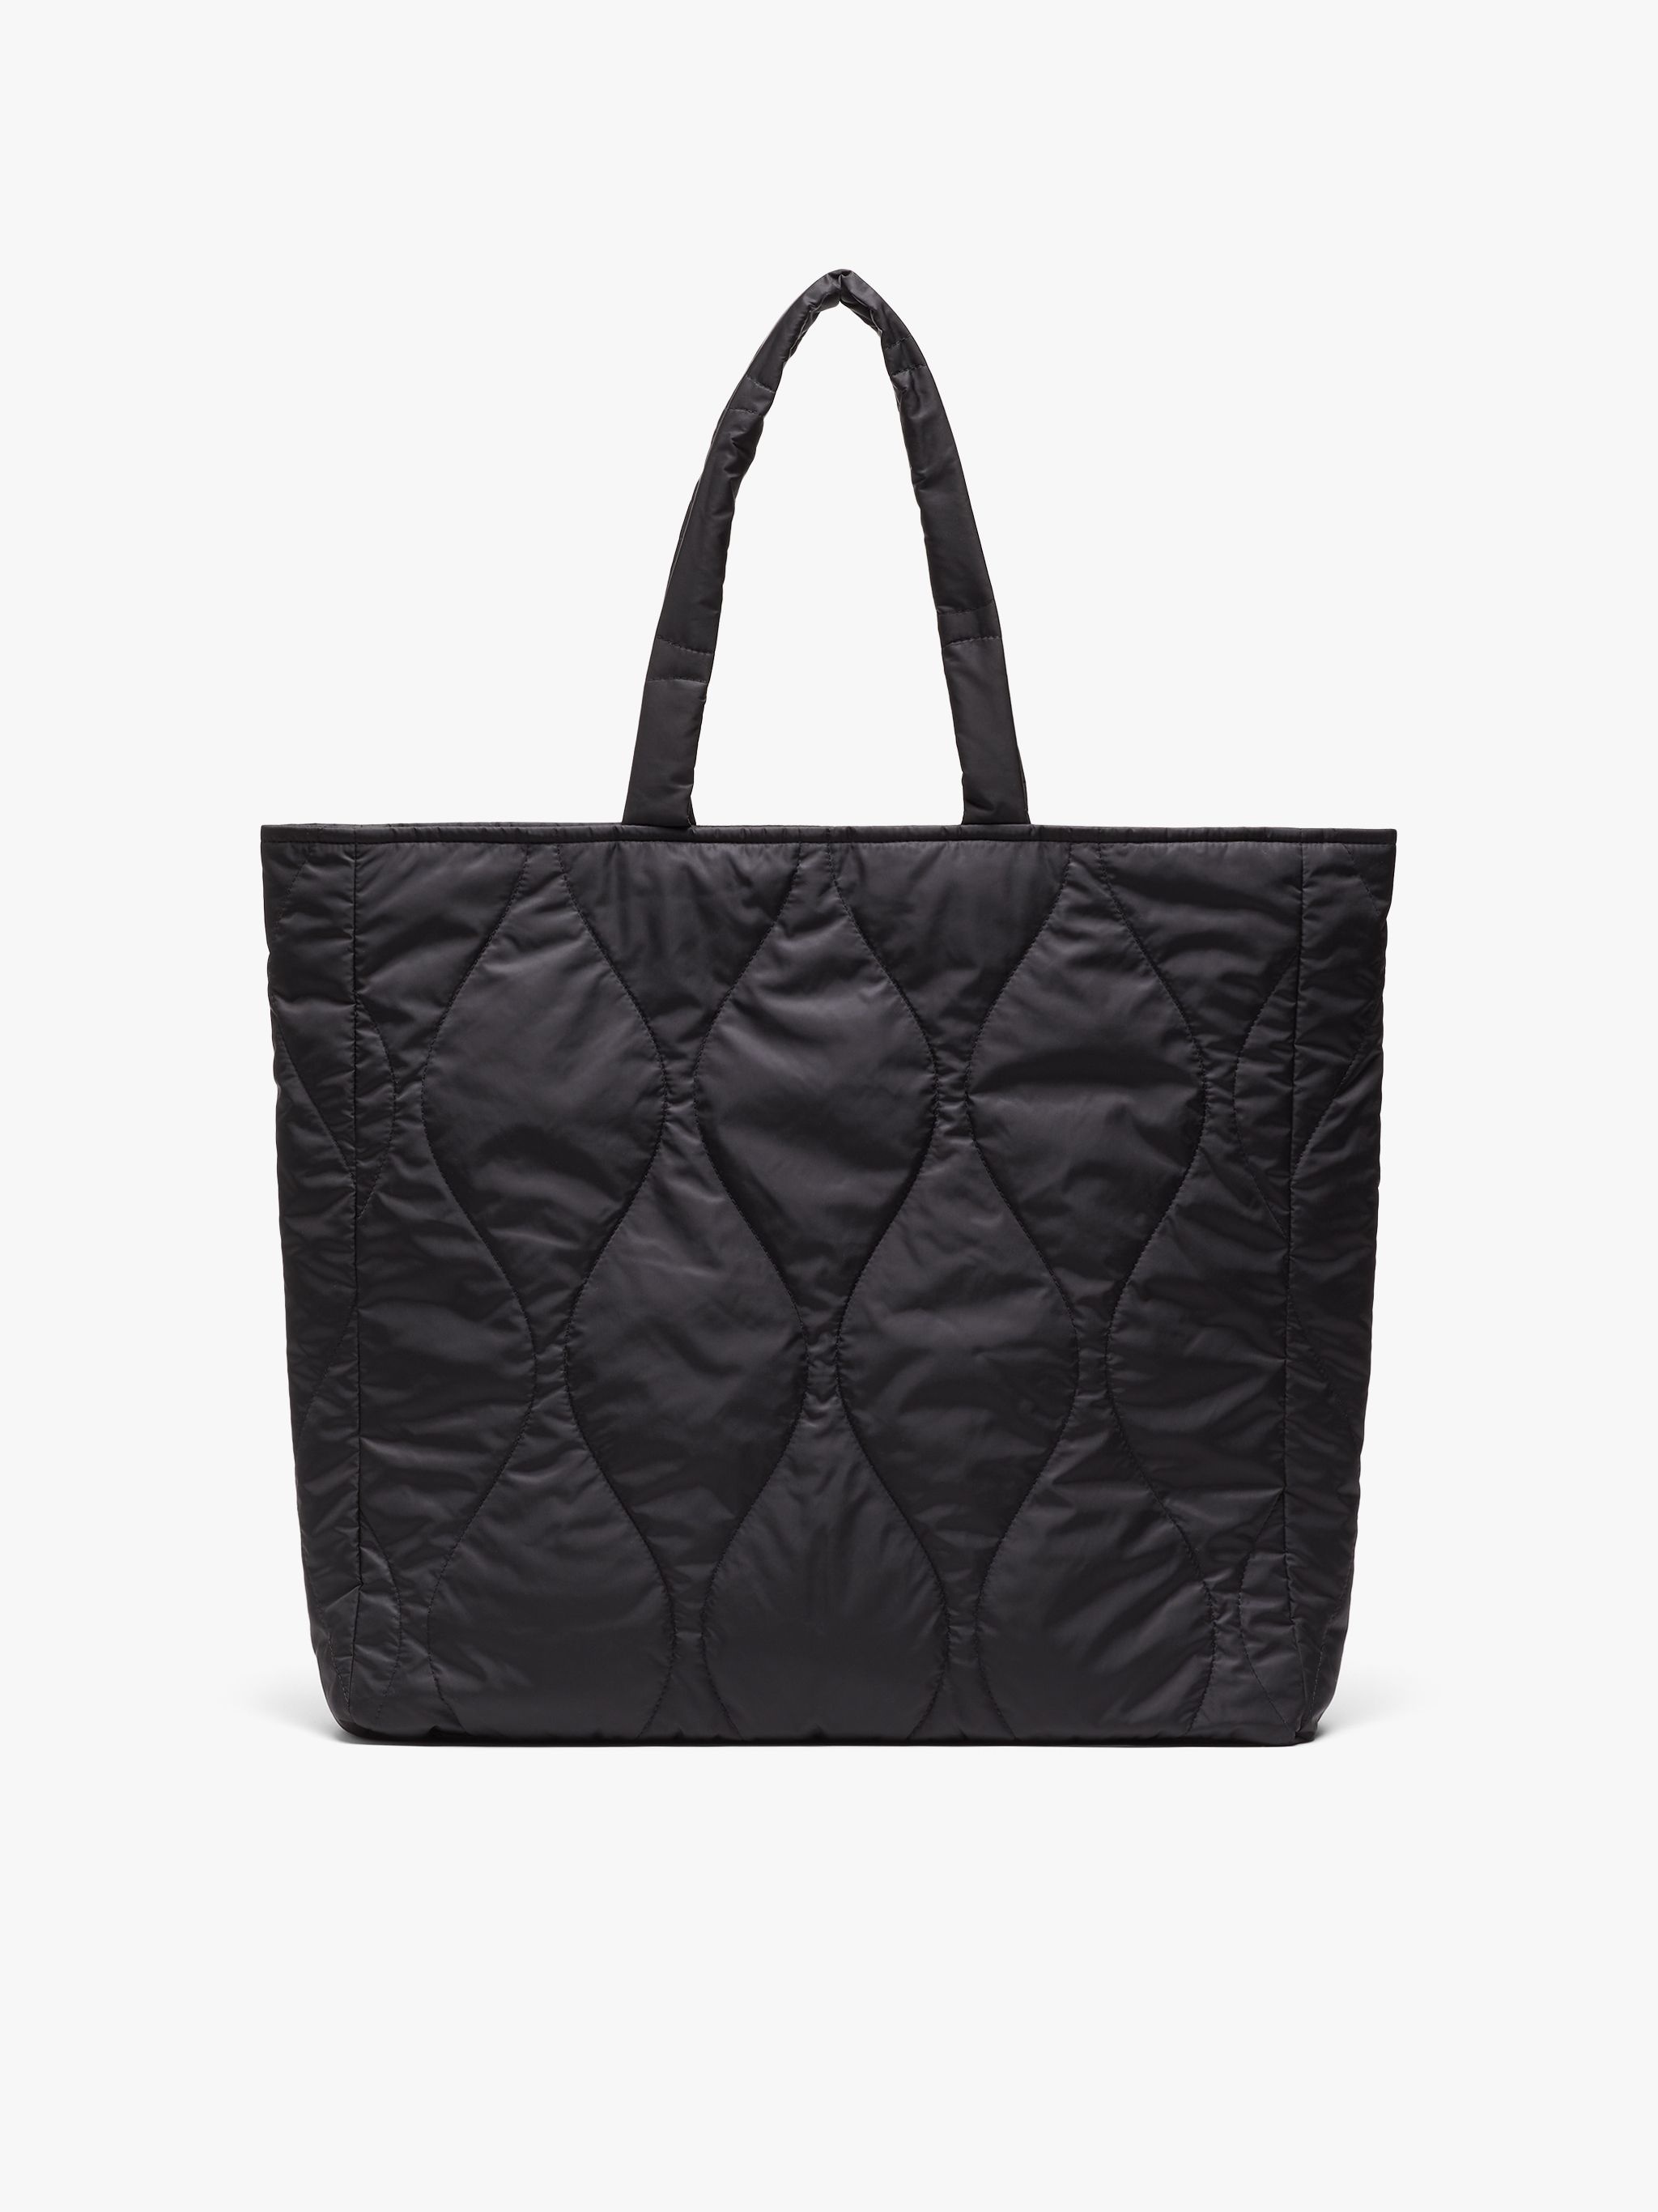 LEXIS BLACK QUILTED NYLON BAG | ACC-BA02 - 2